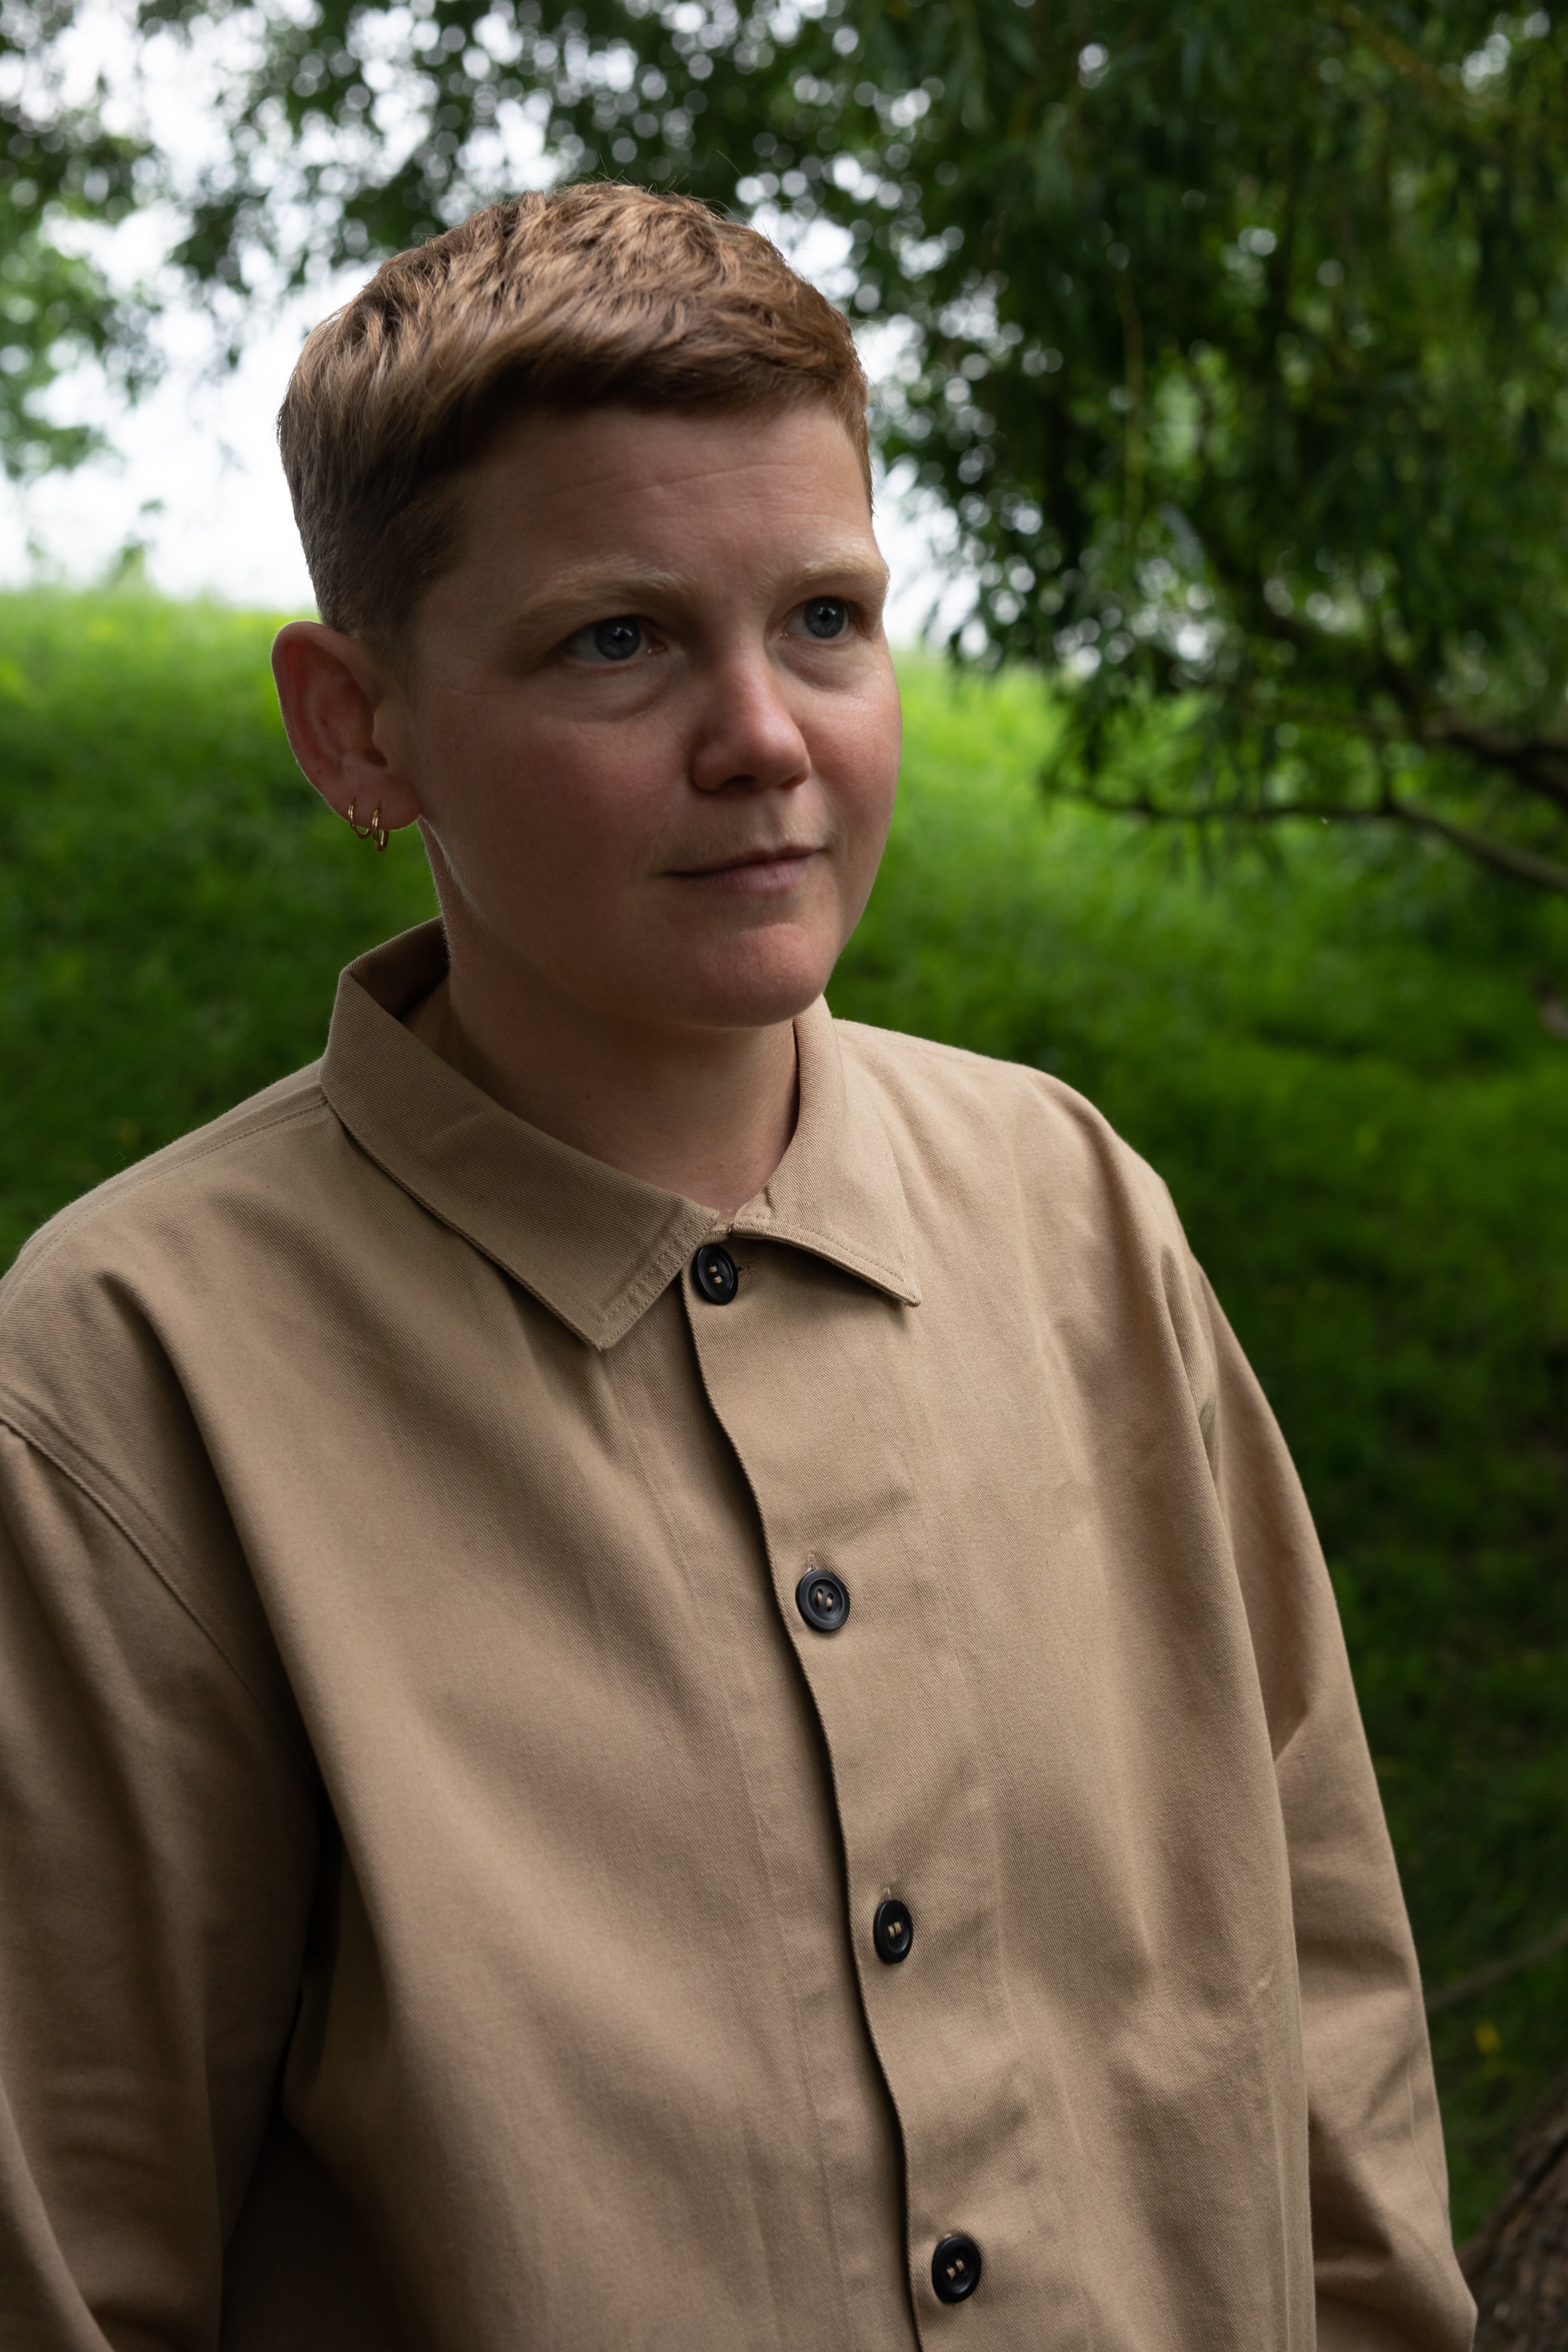 A white non-binary person with short sandy hair wears a long-sleeved khaki shirt and looks off-camera in a park.